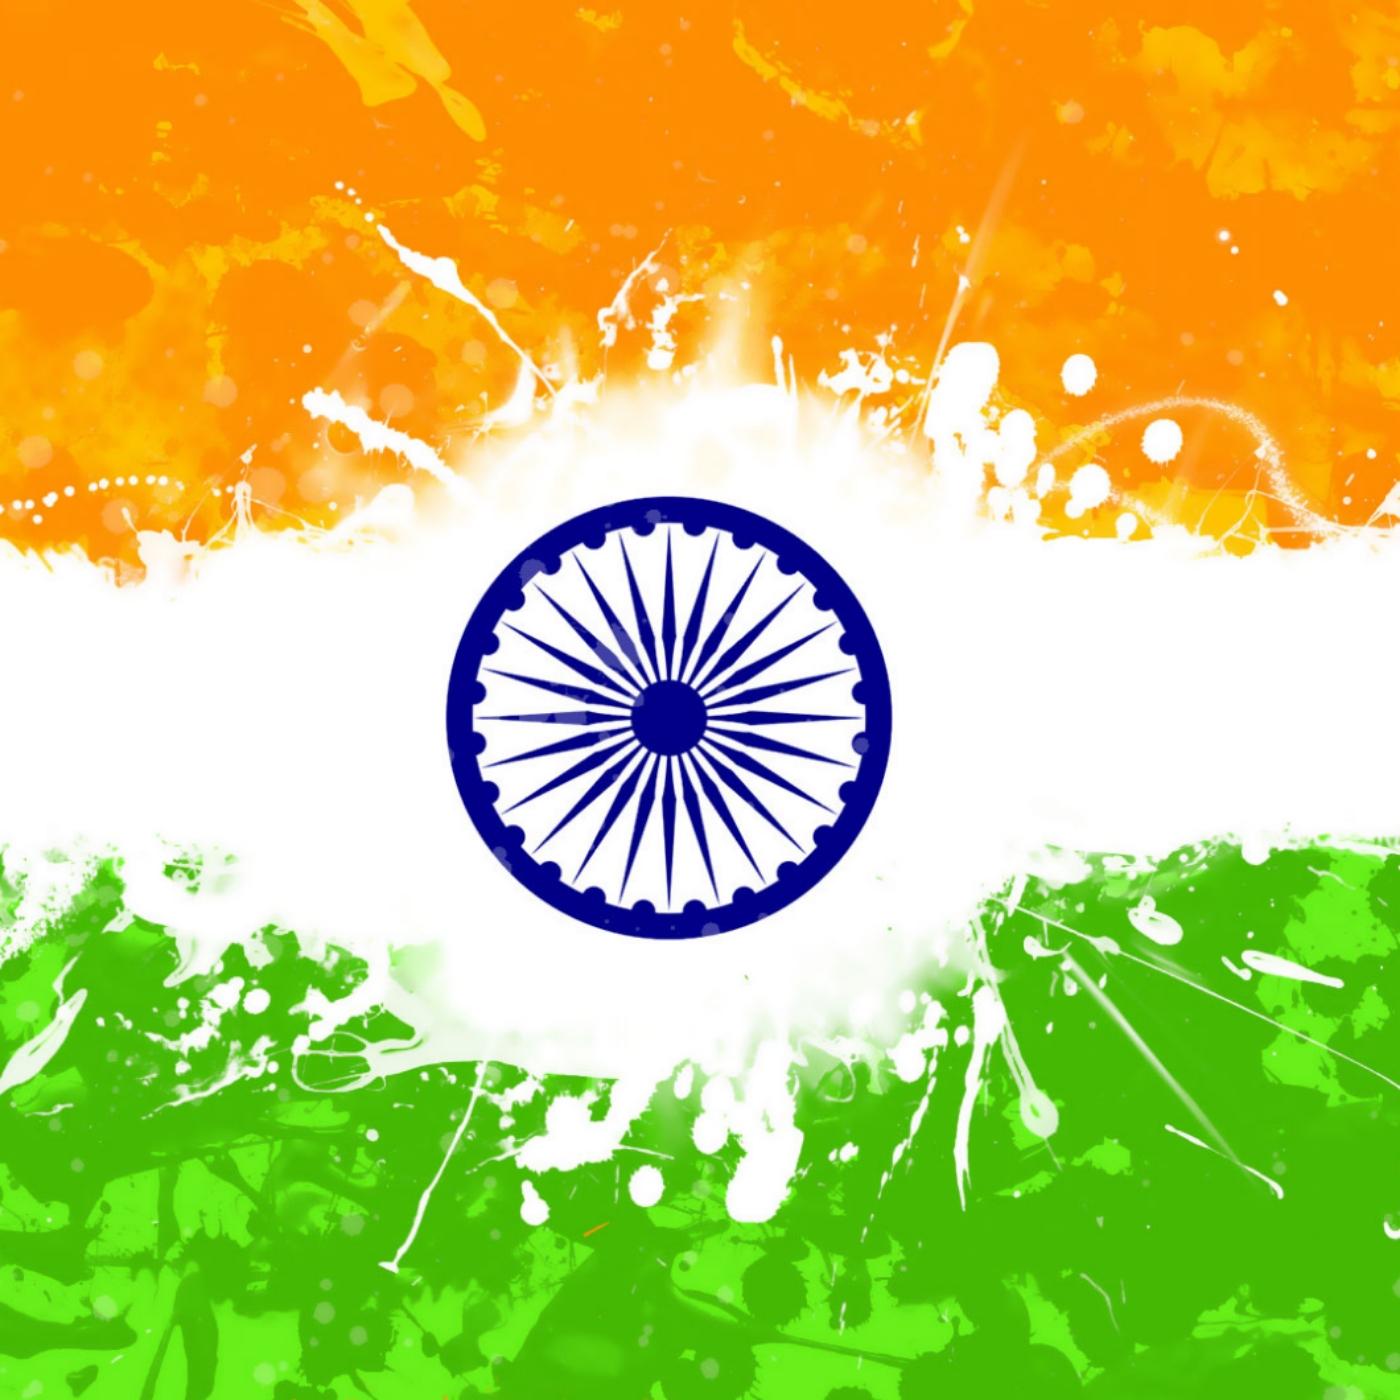 Indian Flag Image for DP